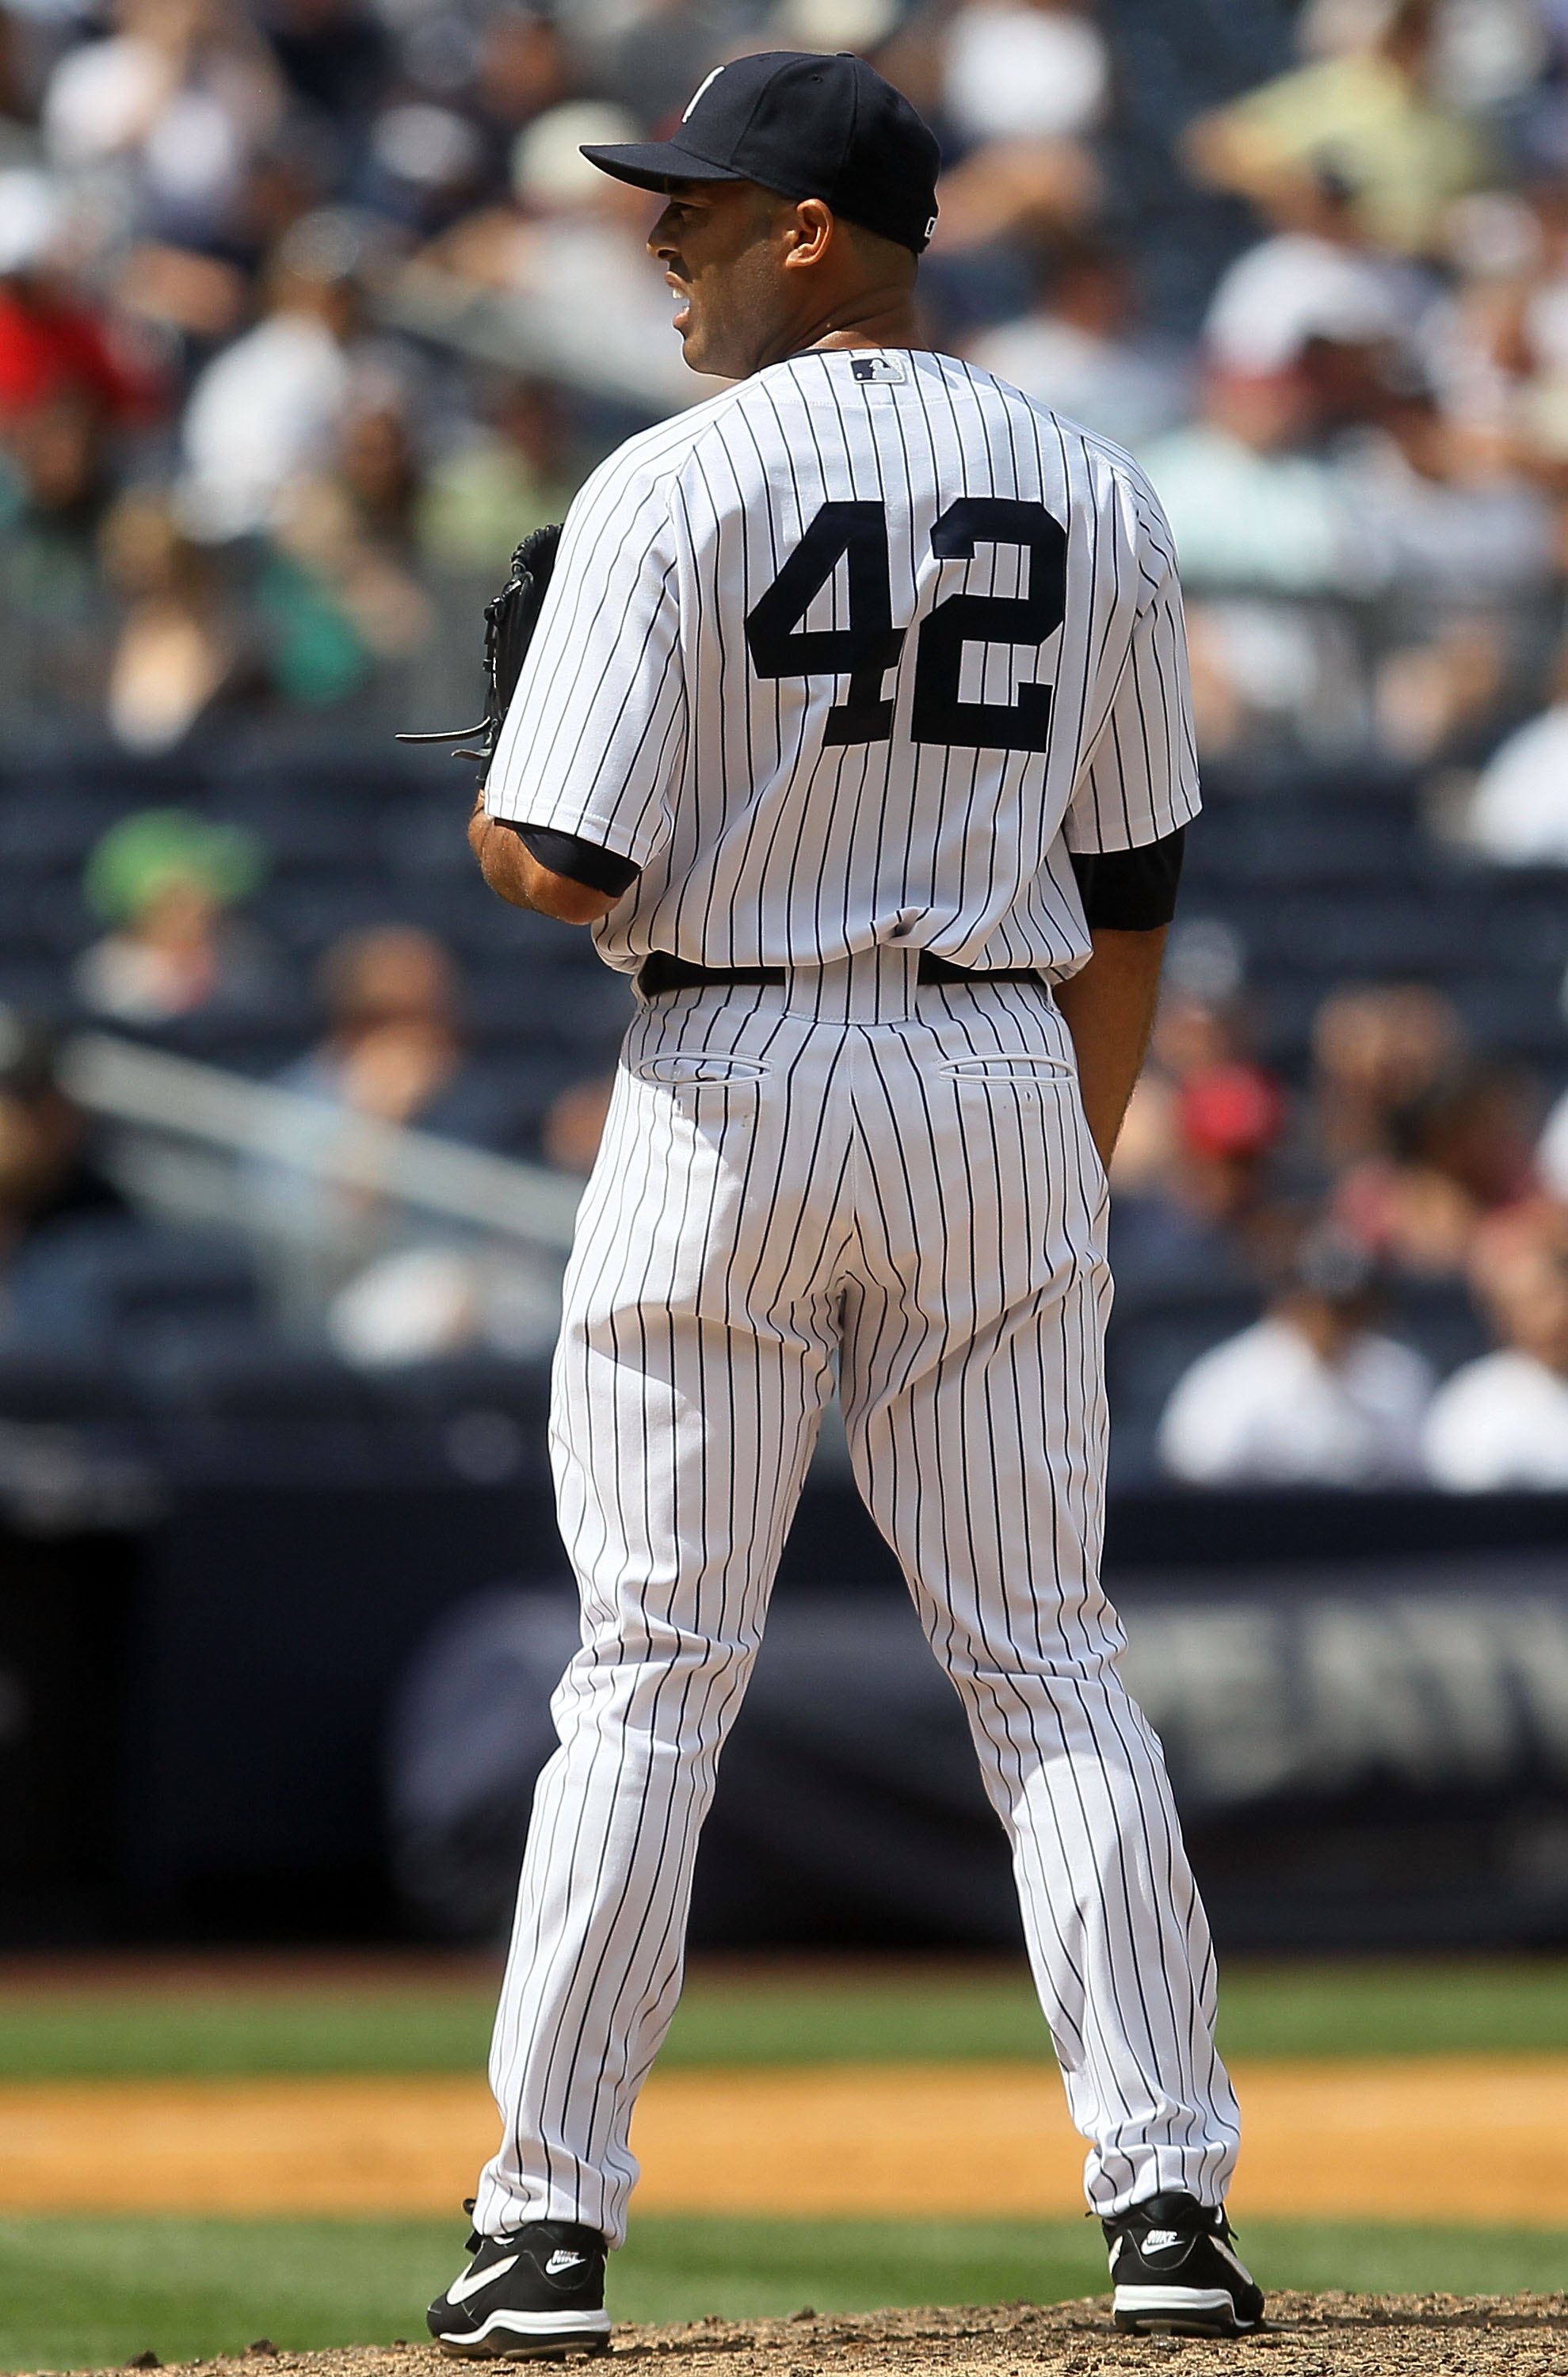 Yankees Retired Numbers - Who Are The 22 Yankees Who Wore Them